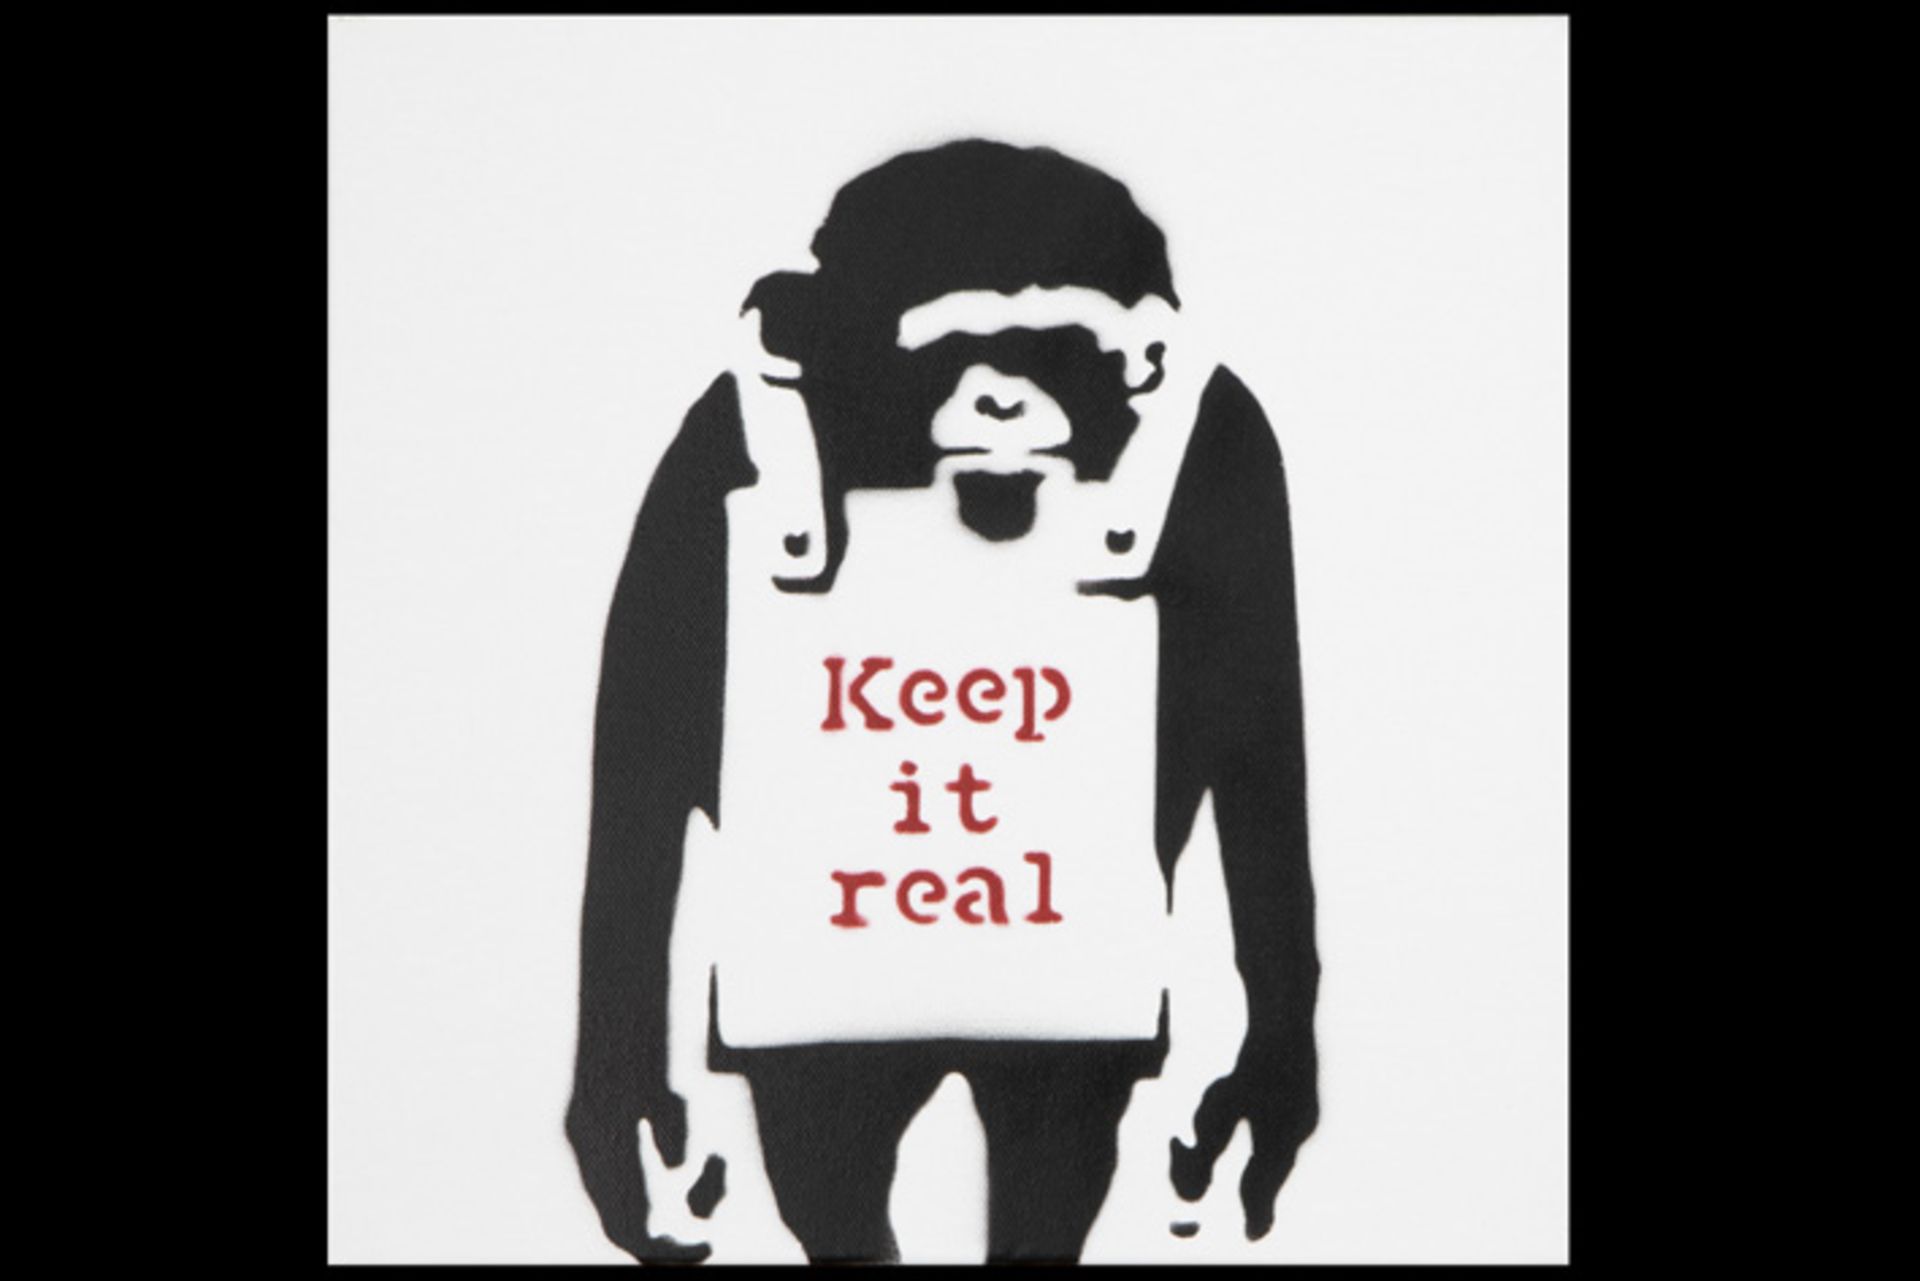 typical Banksy street art "Keep it real" spray paint on canvas - with a Dismaland stamp on the back 